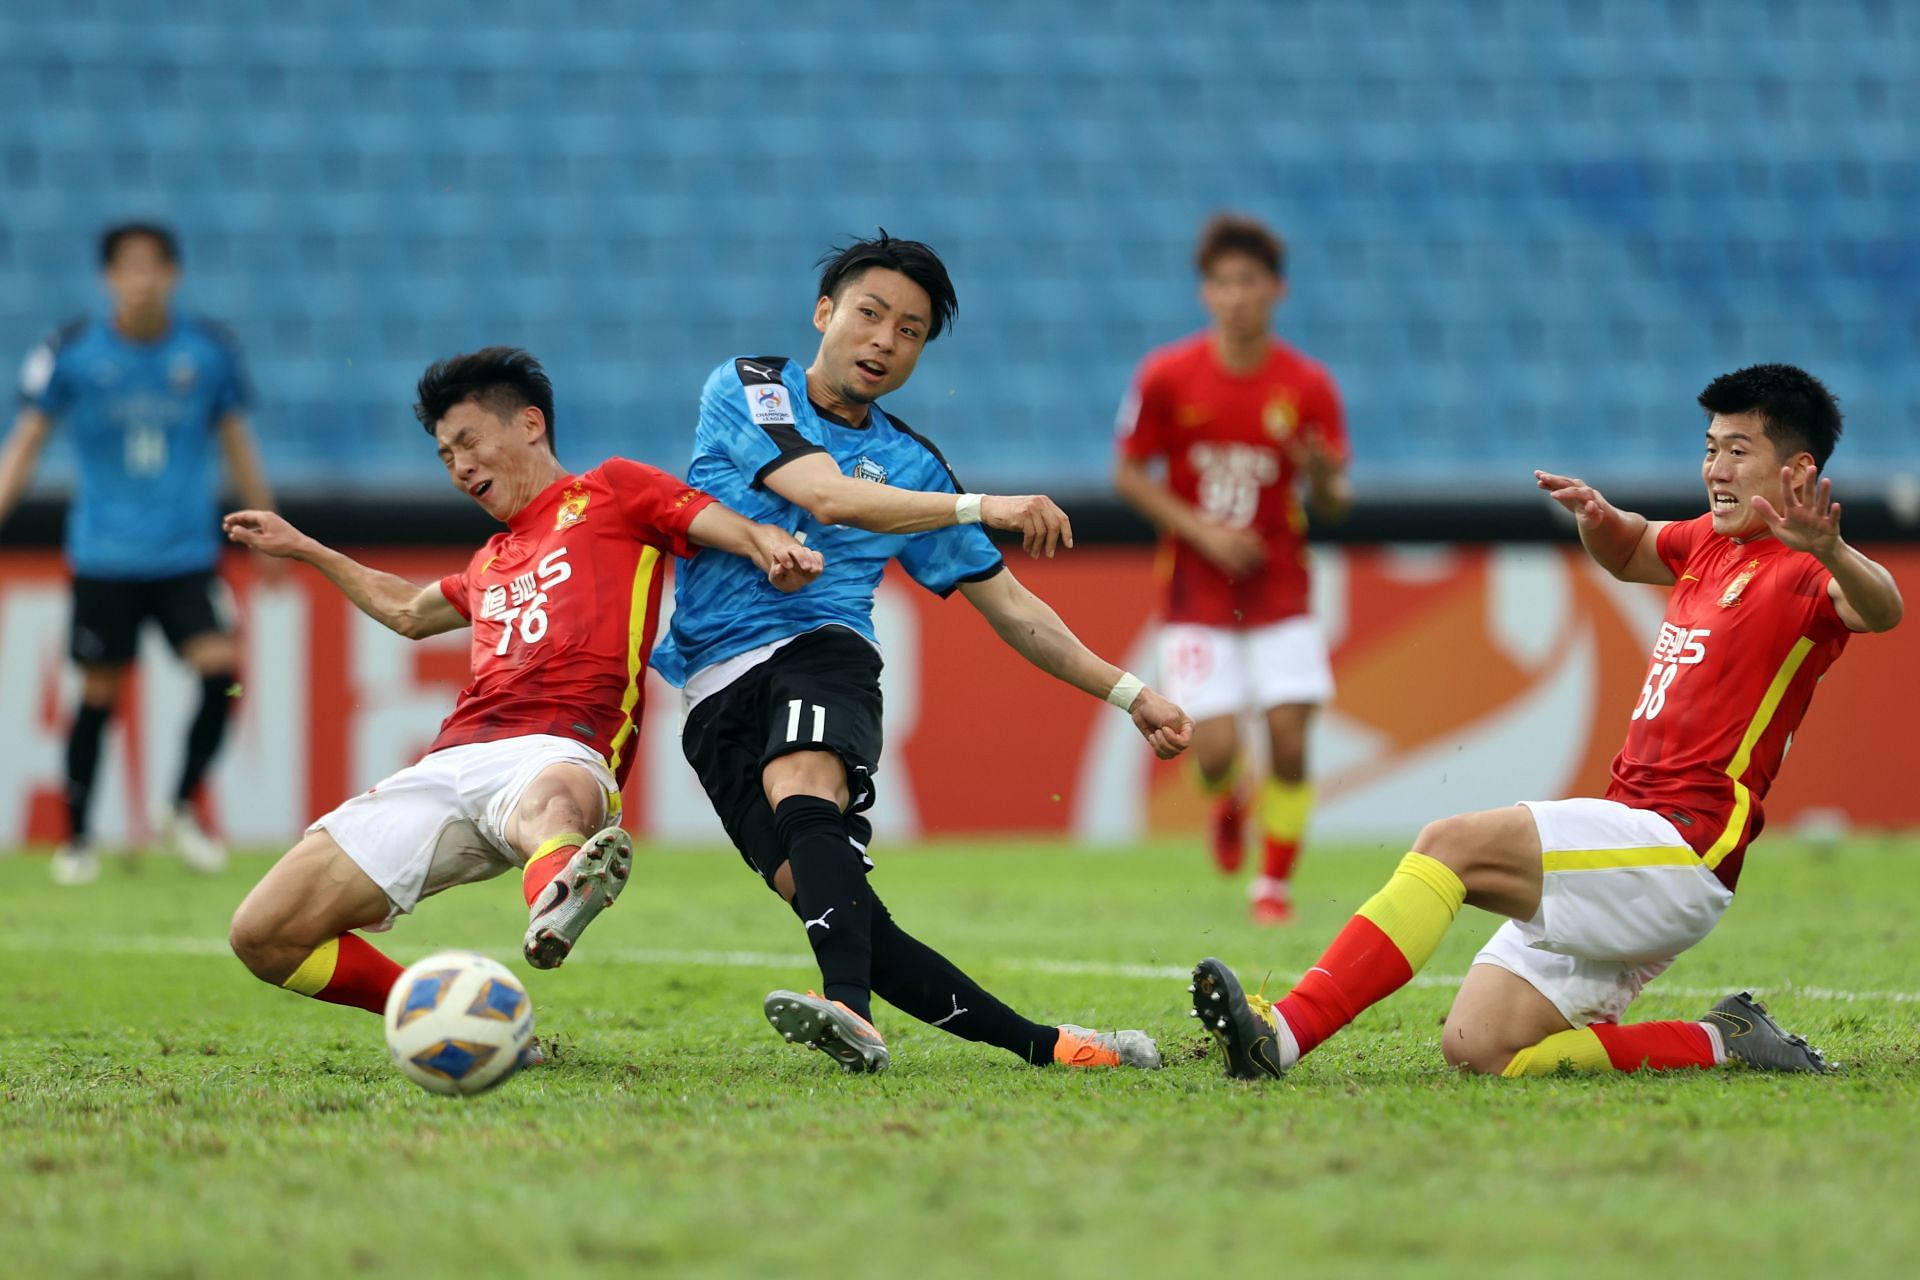 Guangzhou will be looking to pick up their first points in the CSL